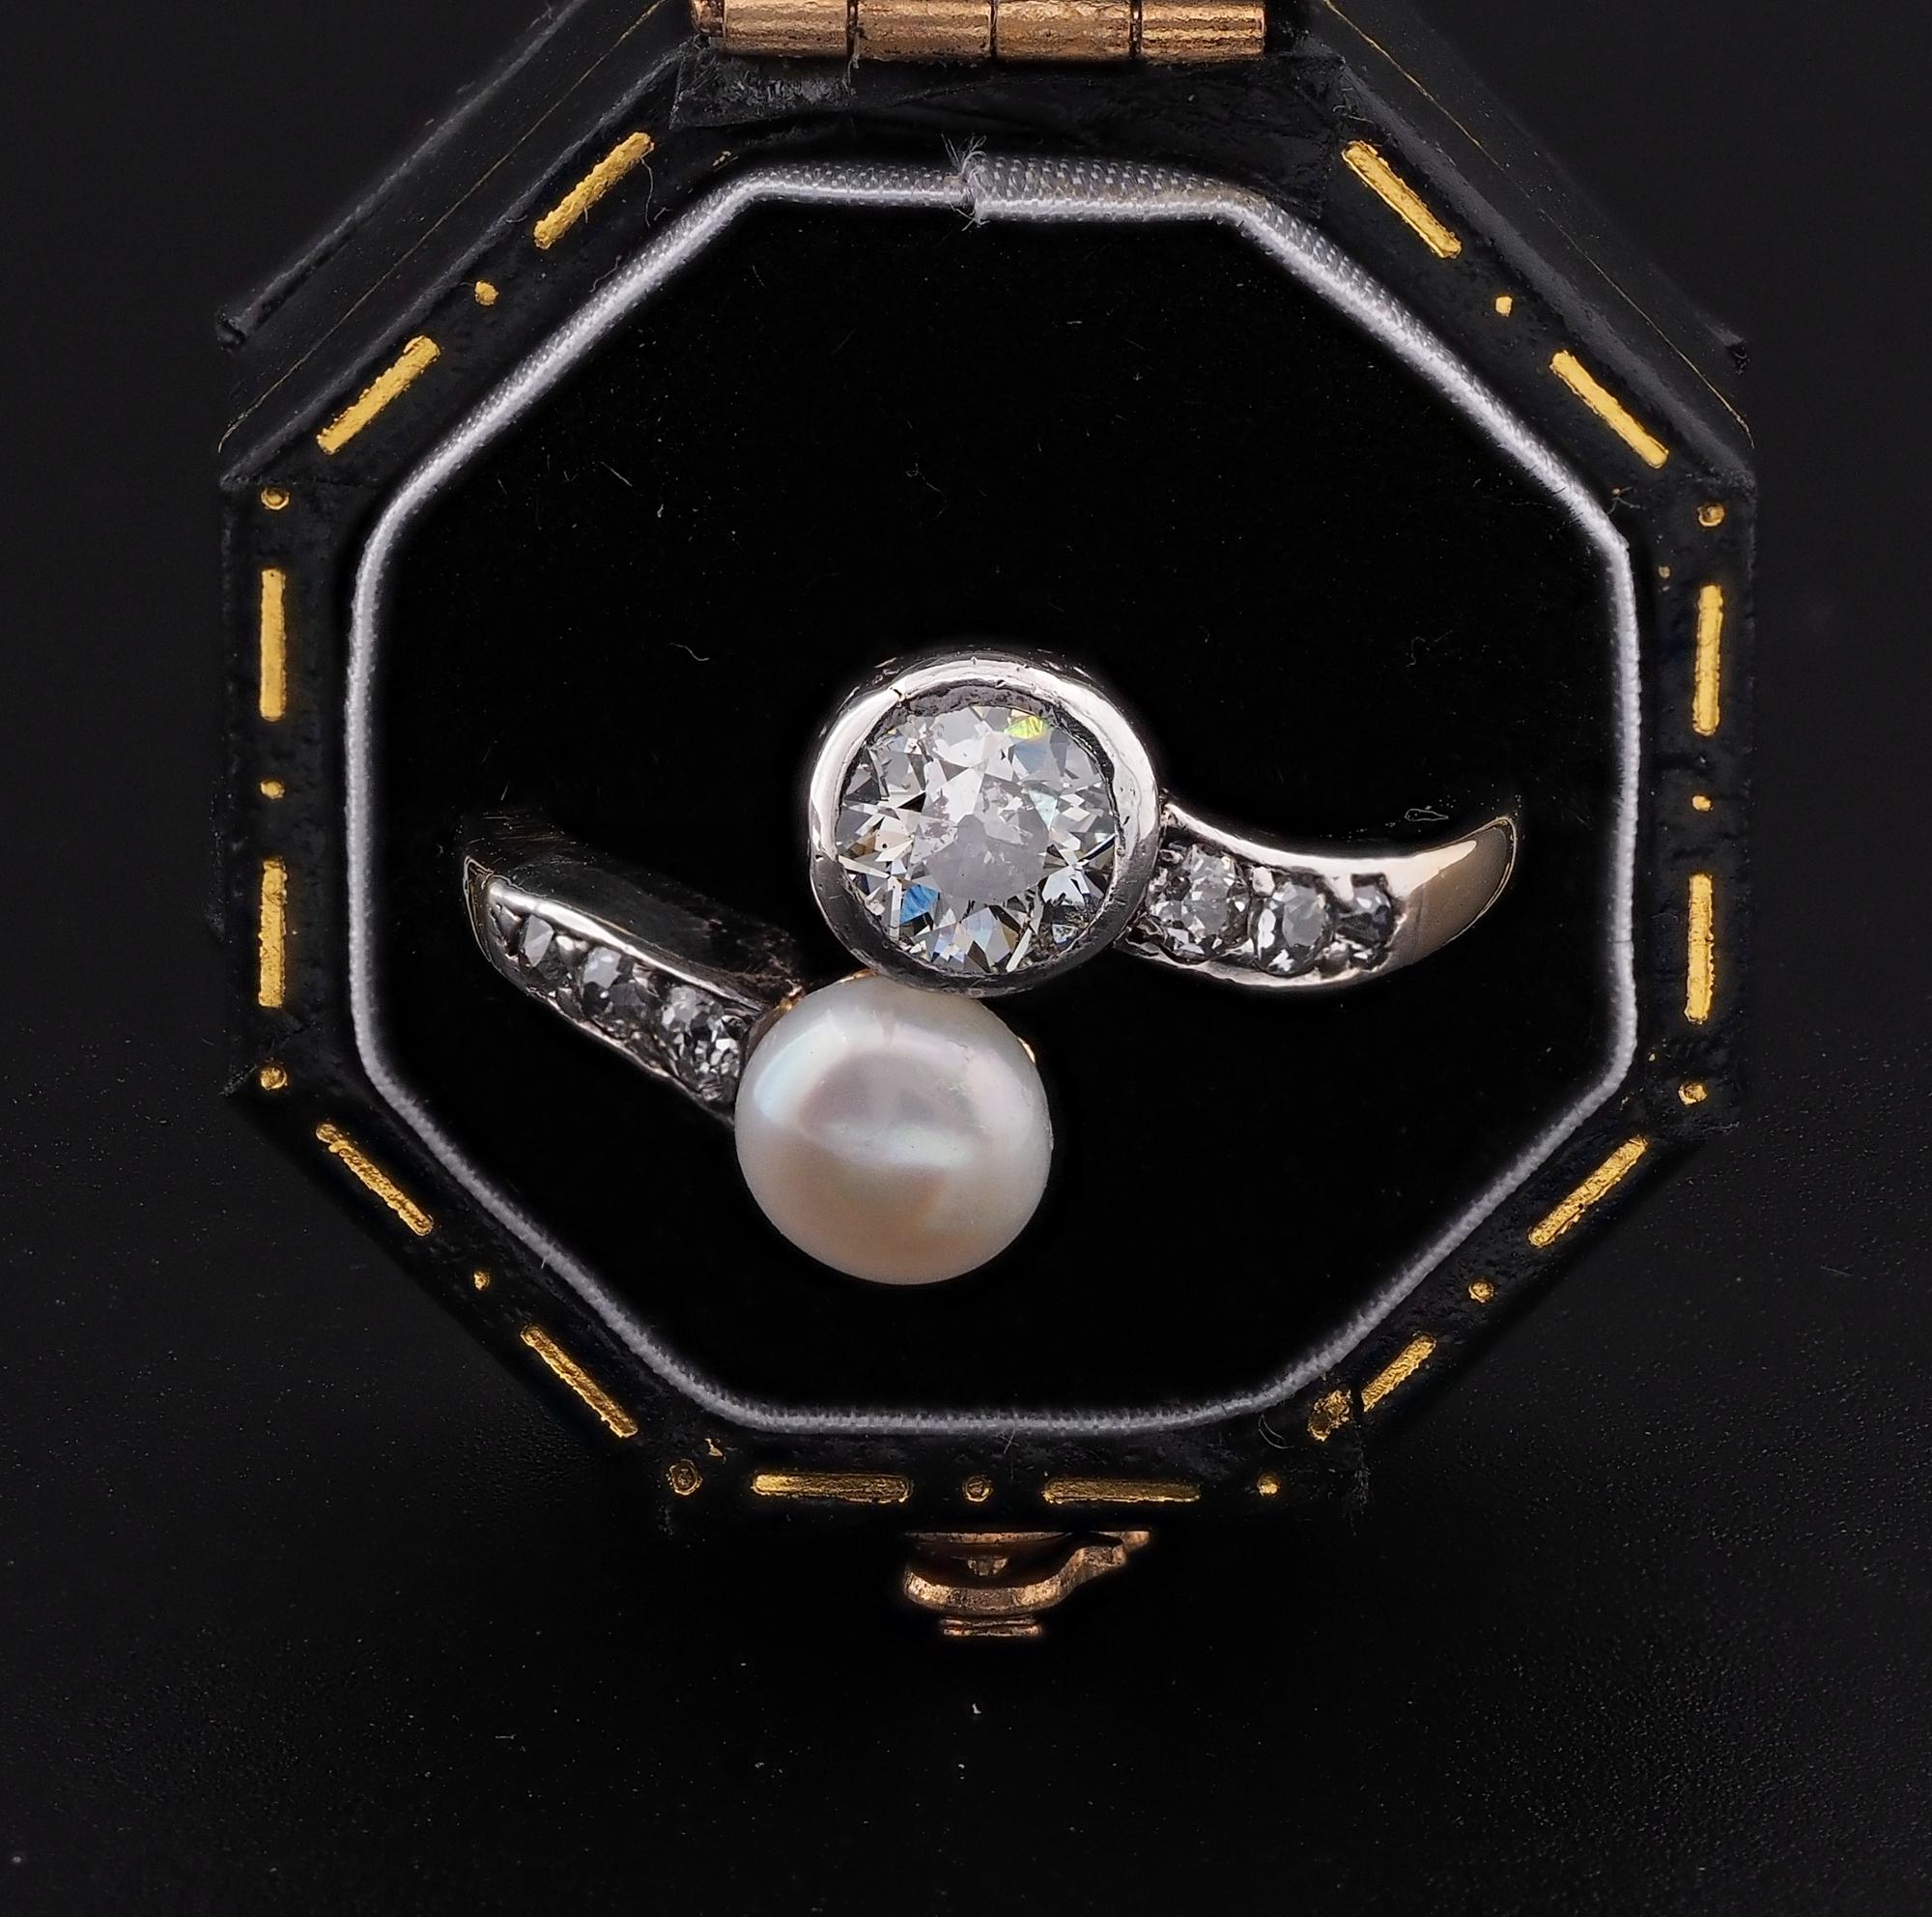 Kissing You & Me
This Victorian period ring is this truly gorgeous
The traditional crossover ring as romantic love token standing for You & Me kissing, 1890 ca
Hand crafted of solid 18 KT gold with little silver portions for the Diamond